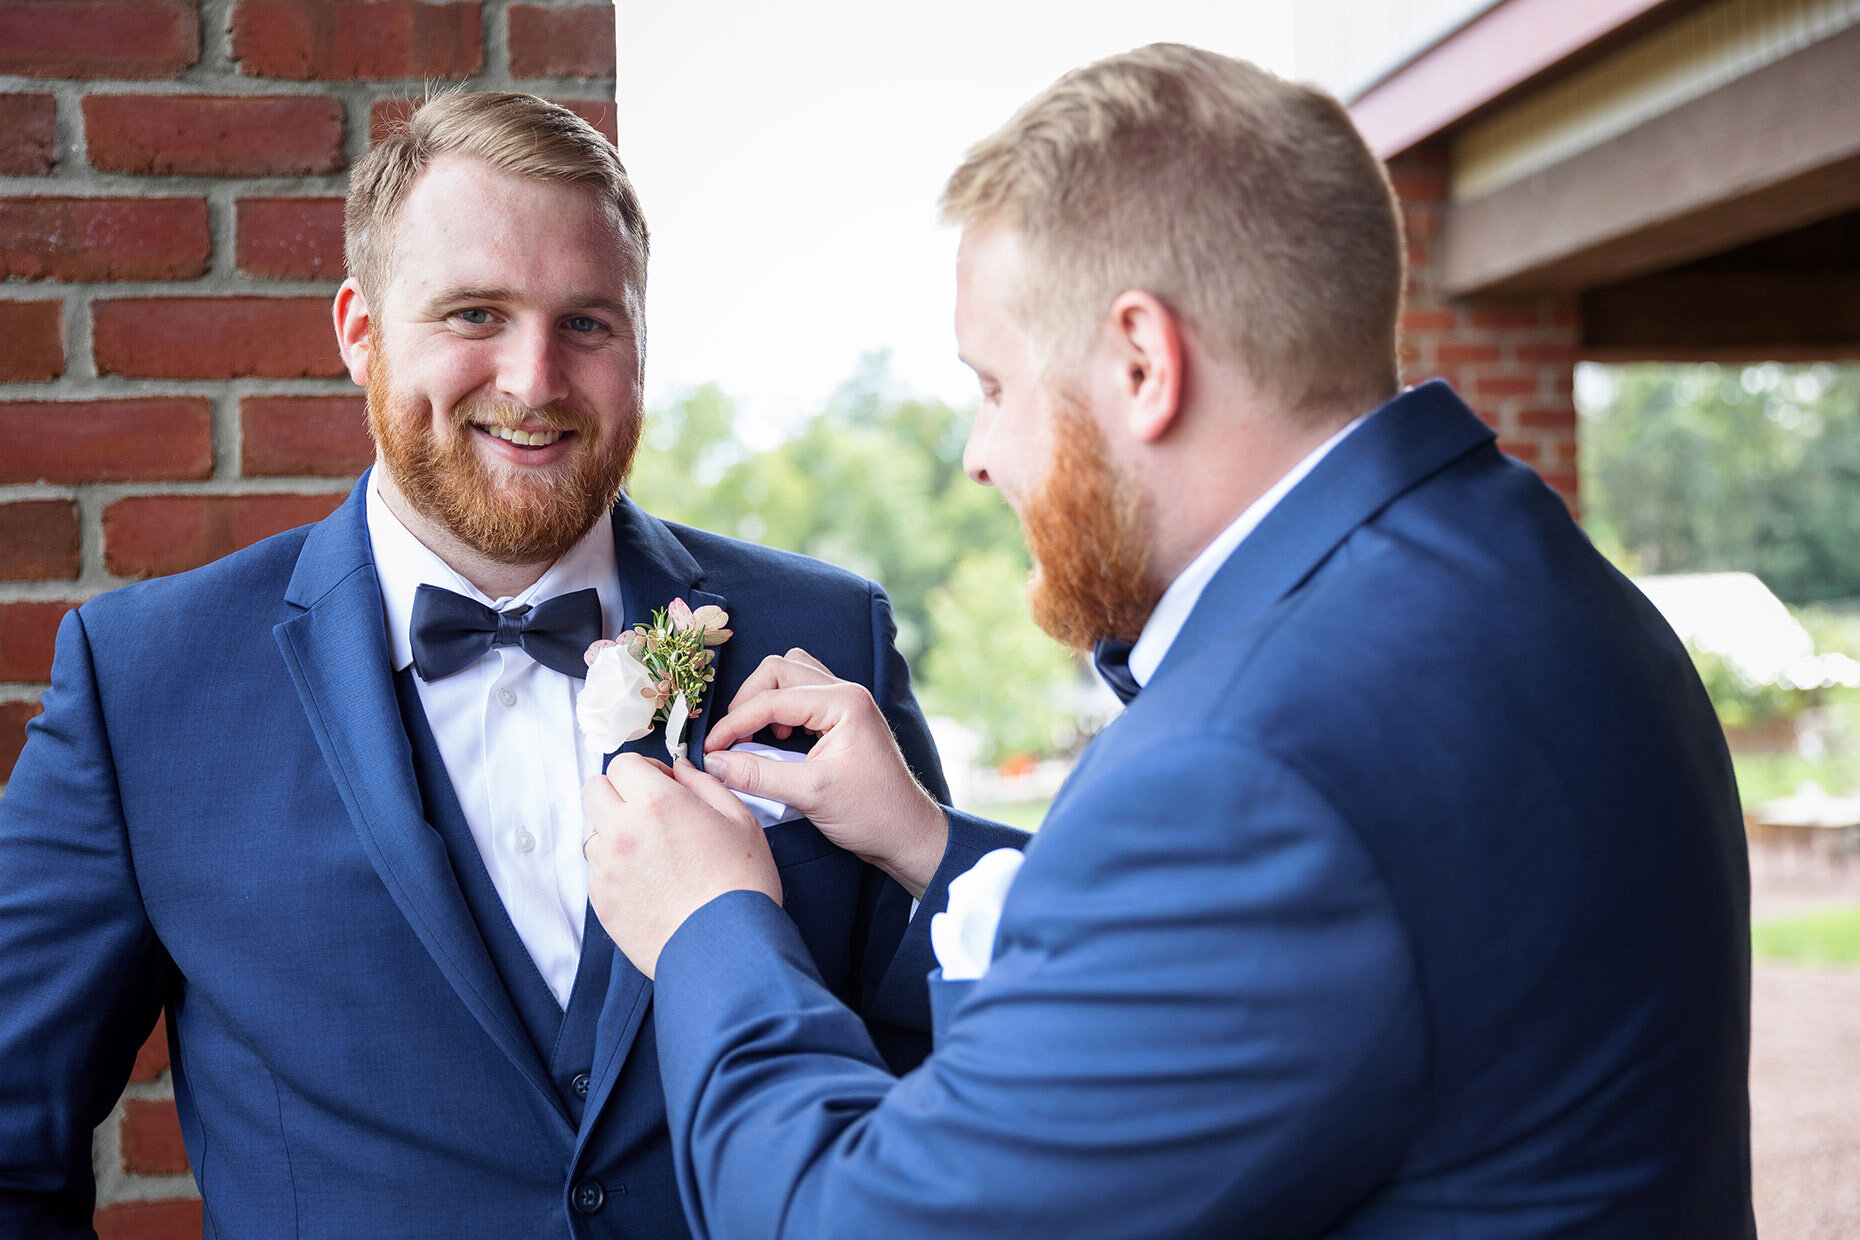 Brother Pinning Boutonniere on Groom Best Man